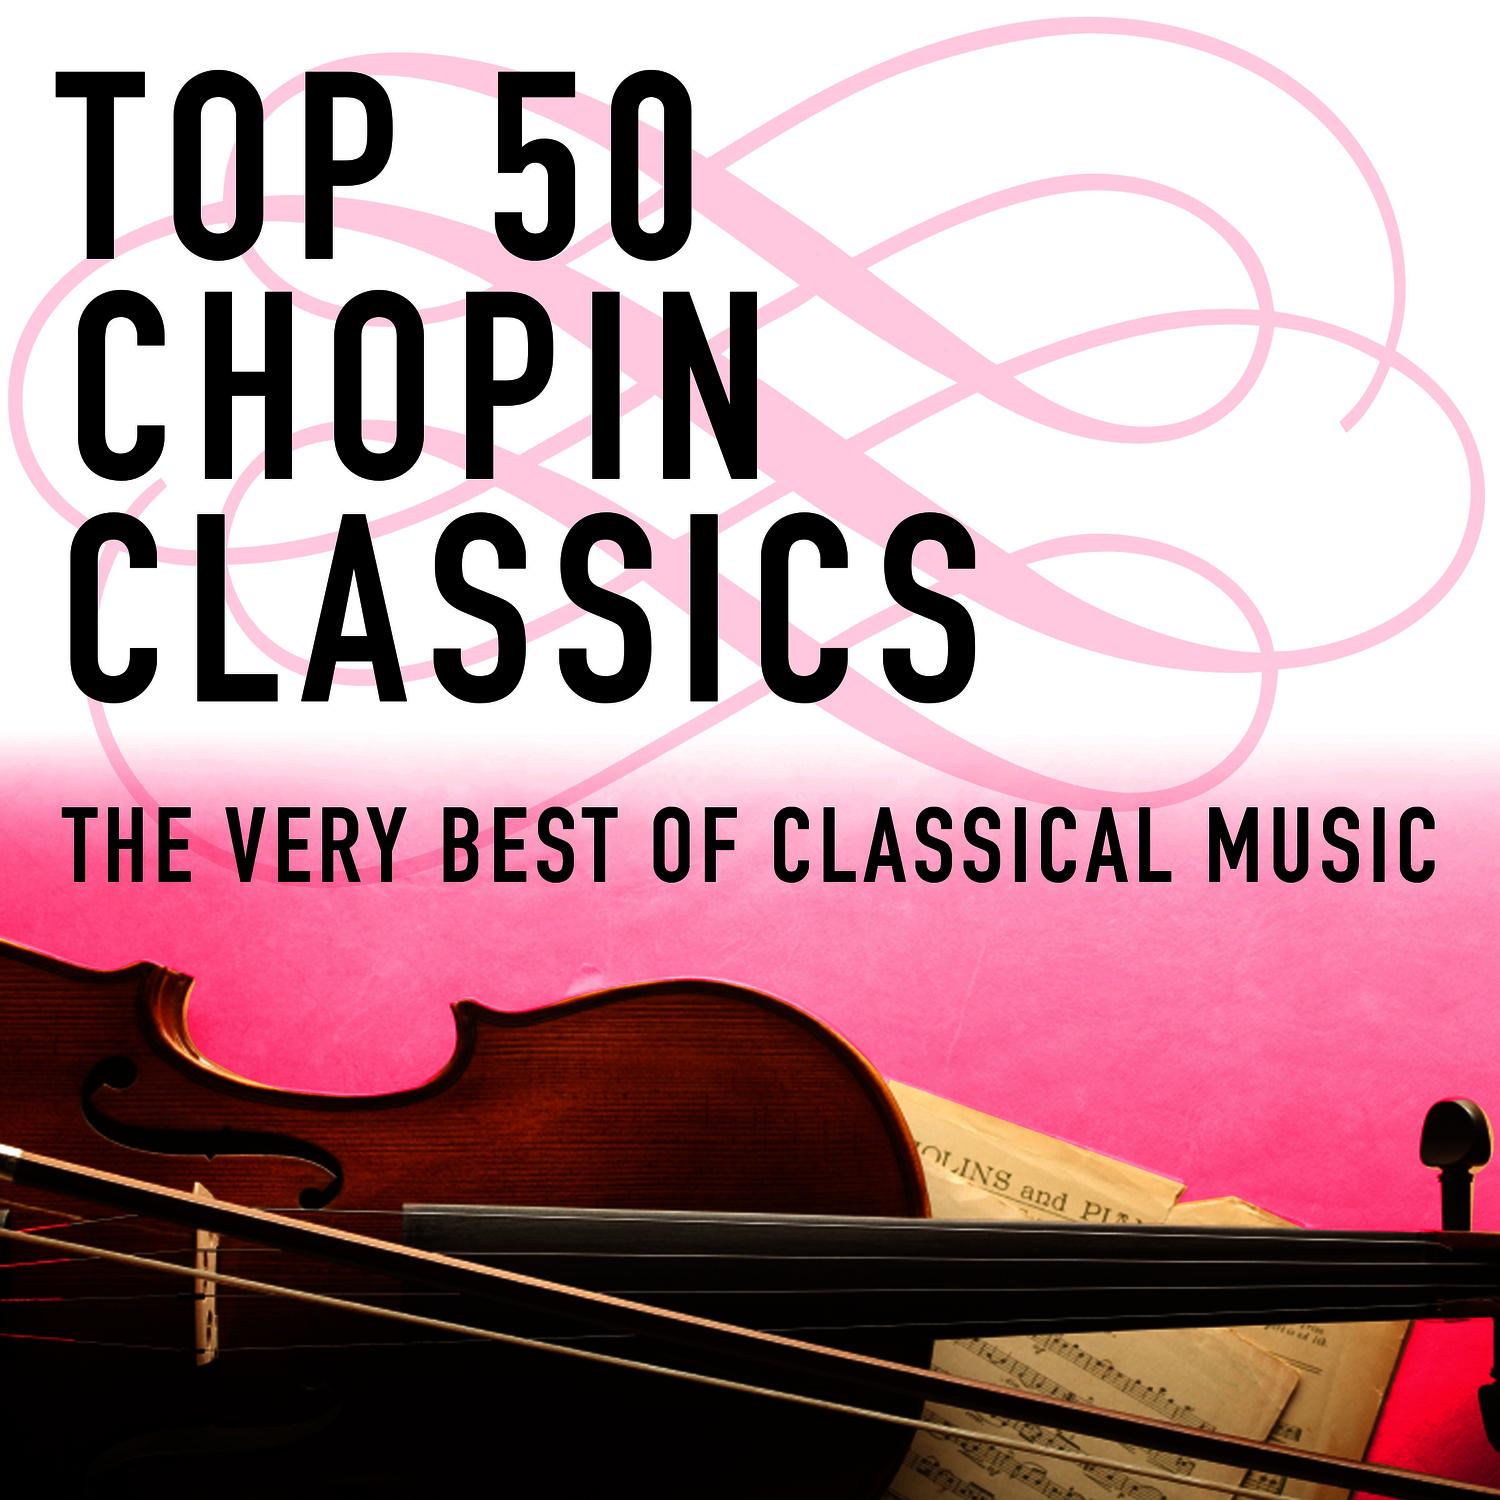 Top 50 Chopin Classics - The Very Best of Classical Music